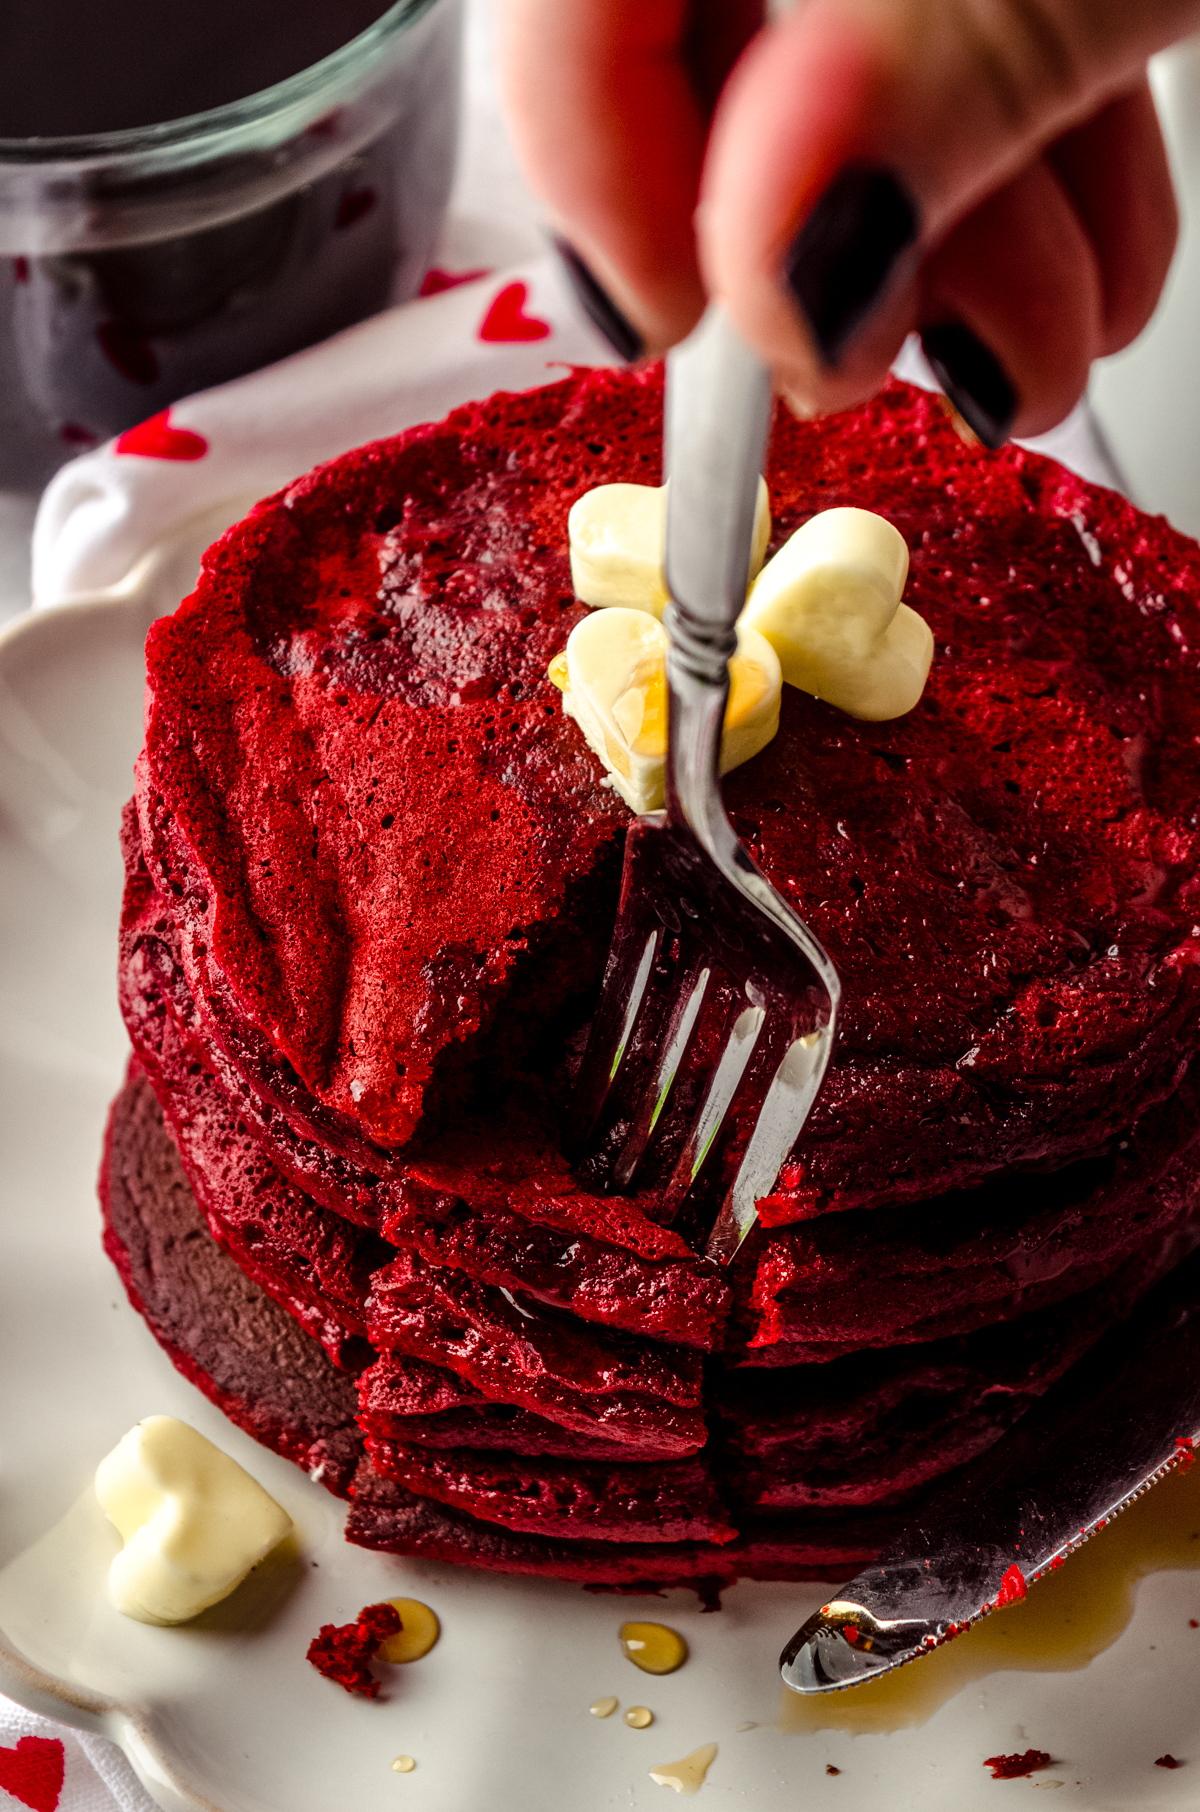 A fork digging into a stack of red velvet pancakes. There is syrup dripping down the sides and little butter hearts on top of the pancakes.